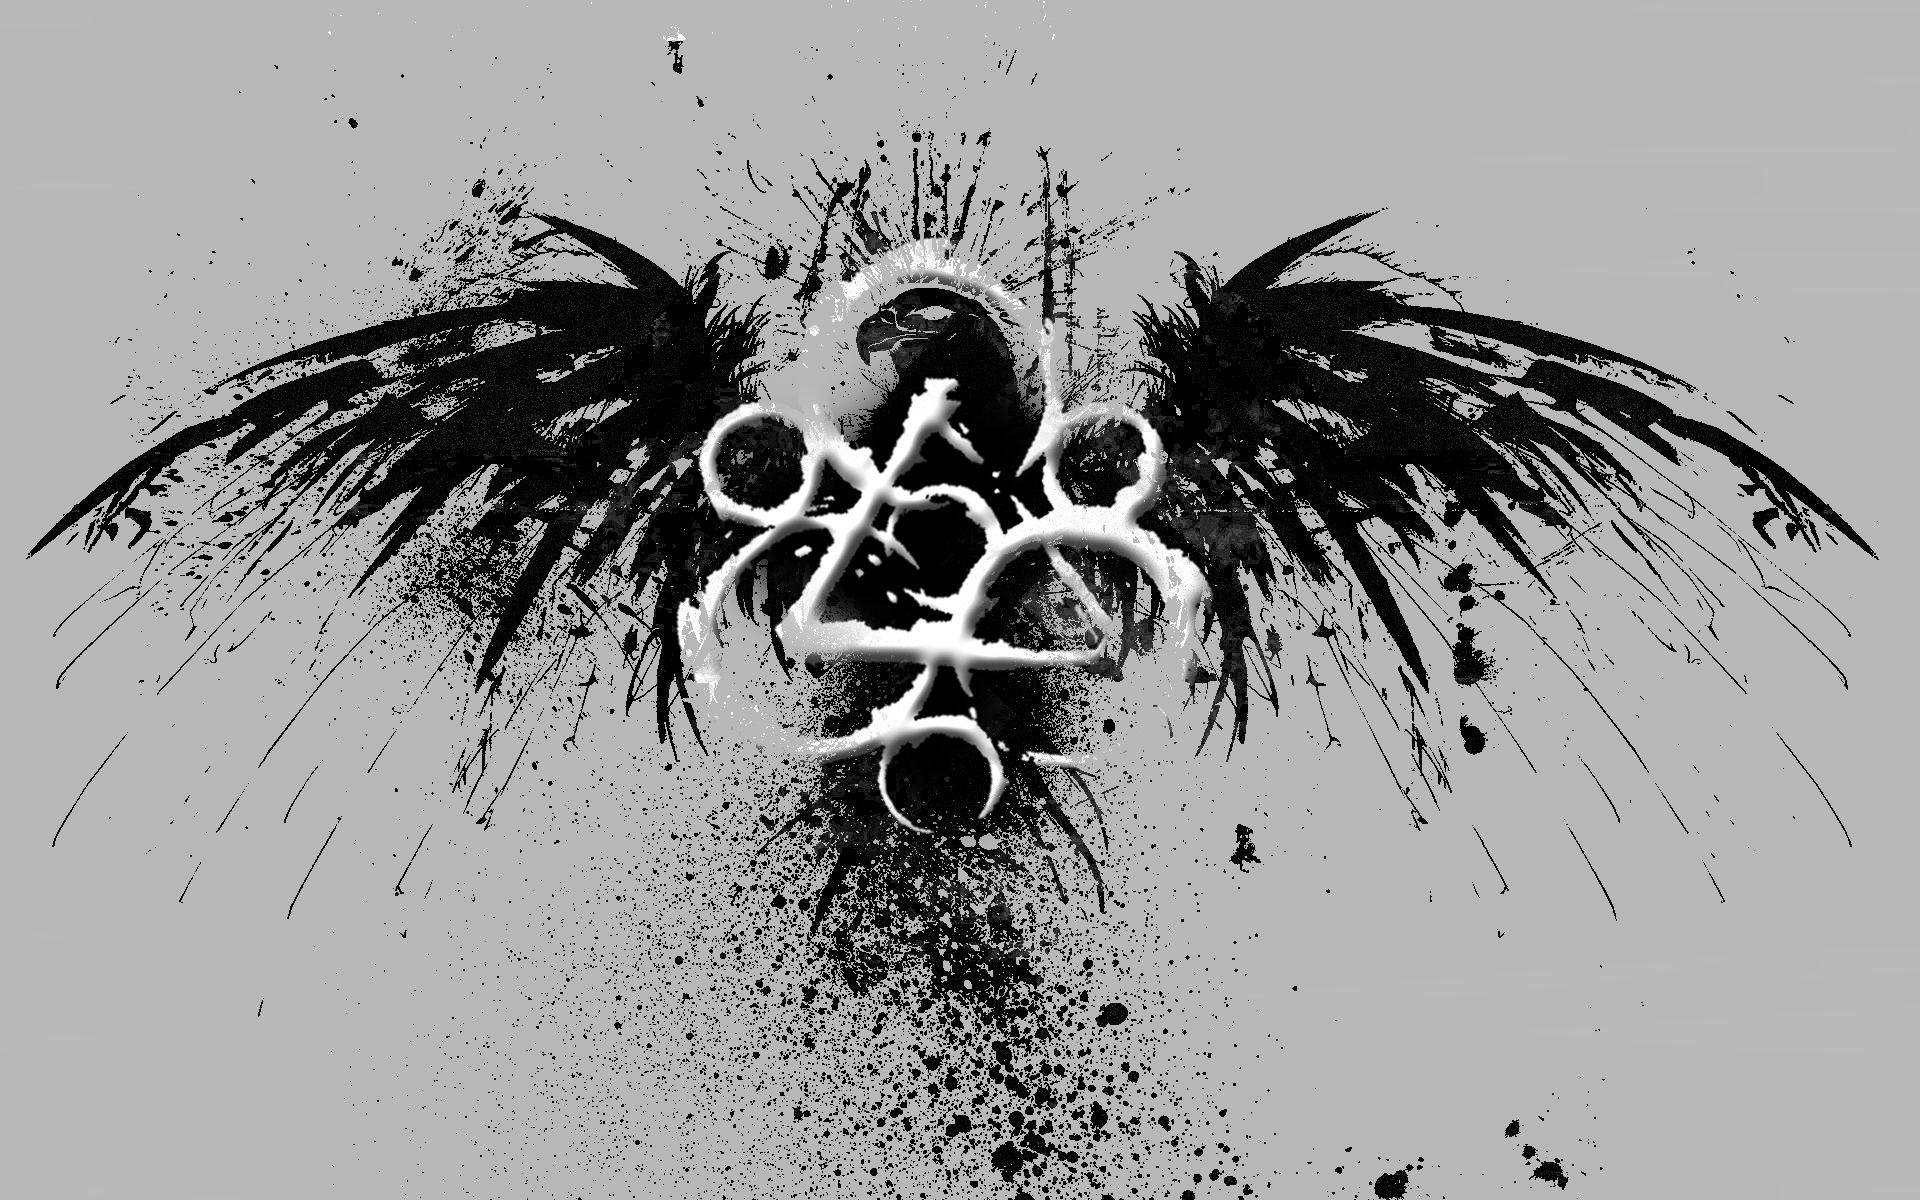 Coheed and cambria wallpapers  Coheed and cambria Tattoo design drawings  Album art